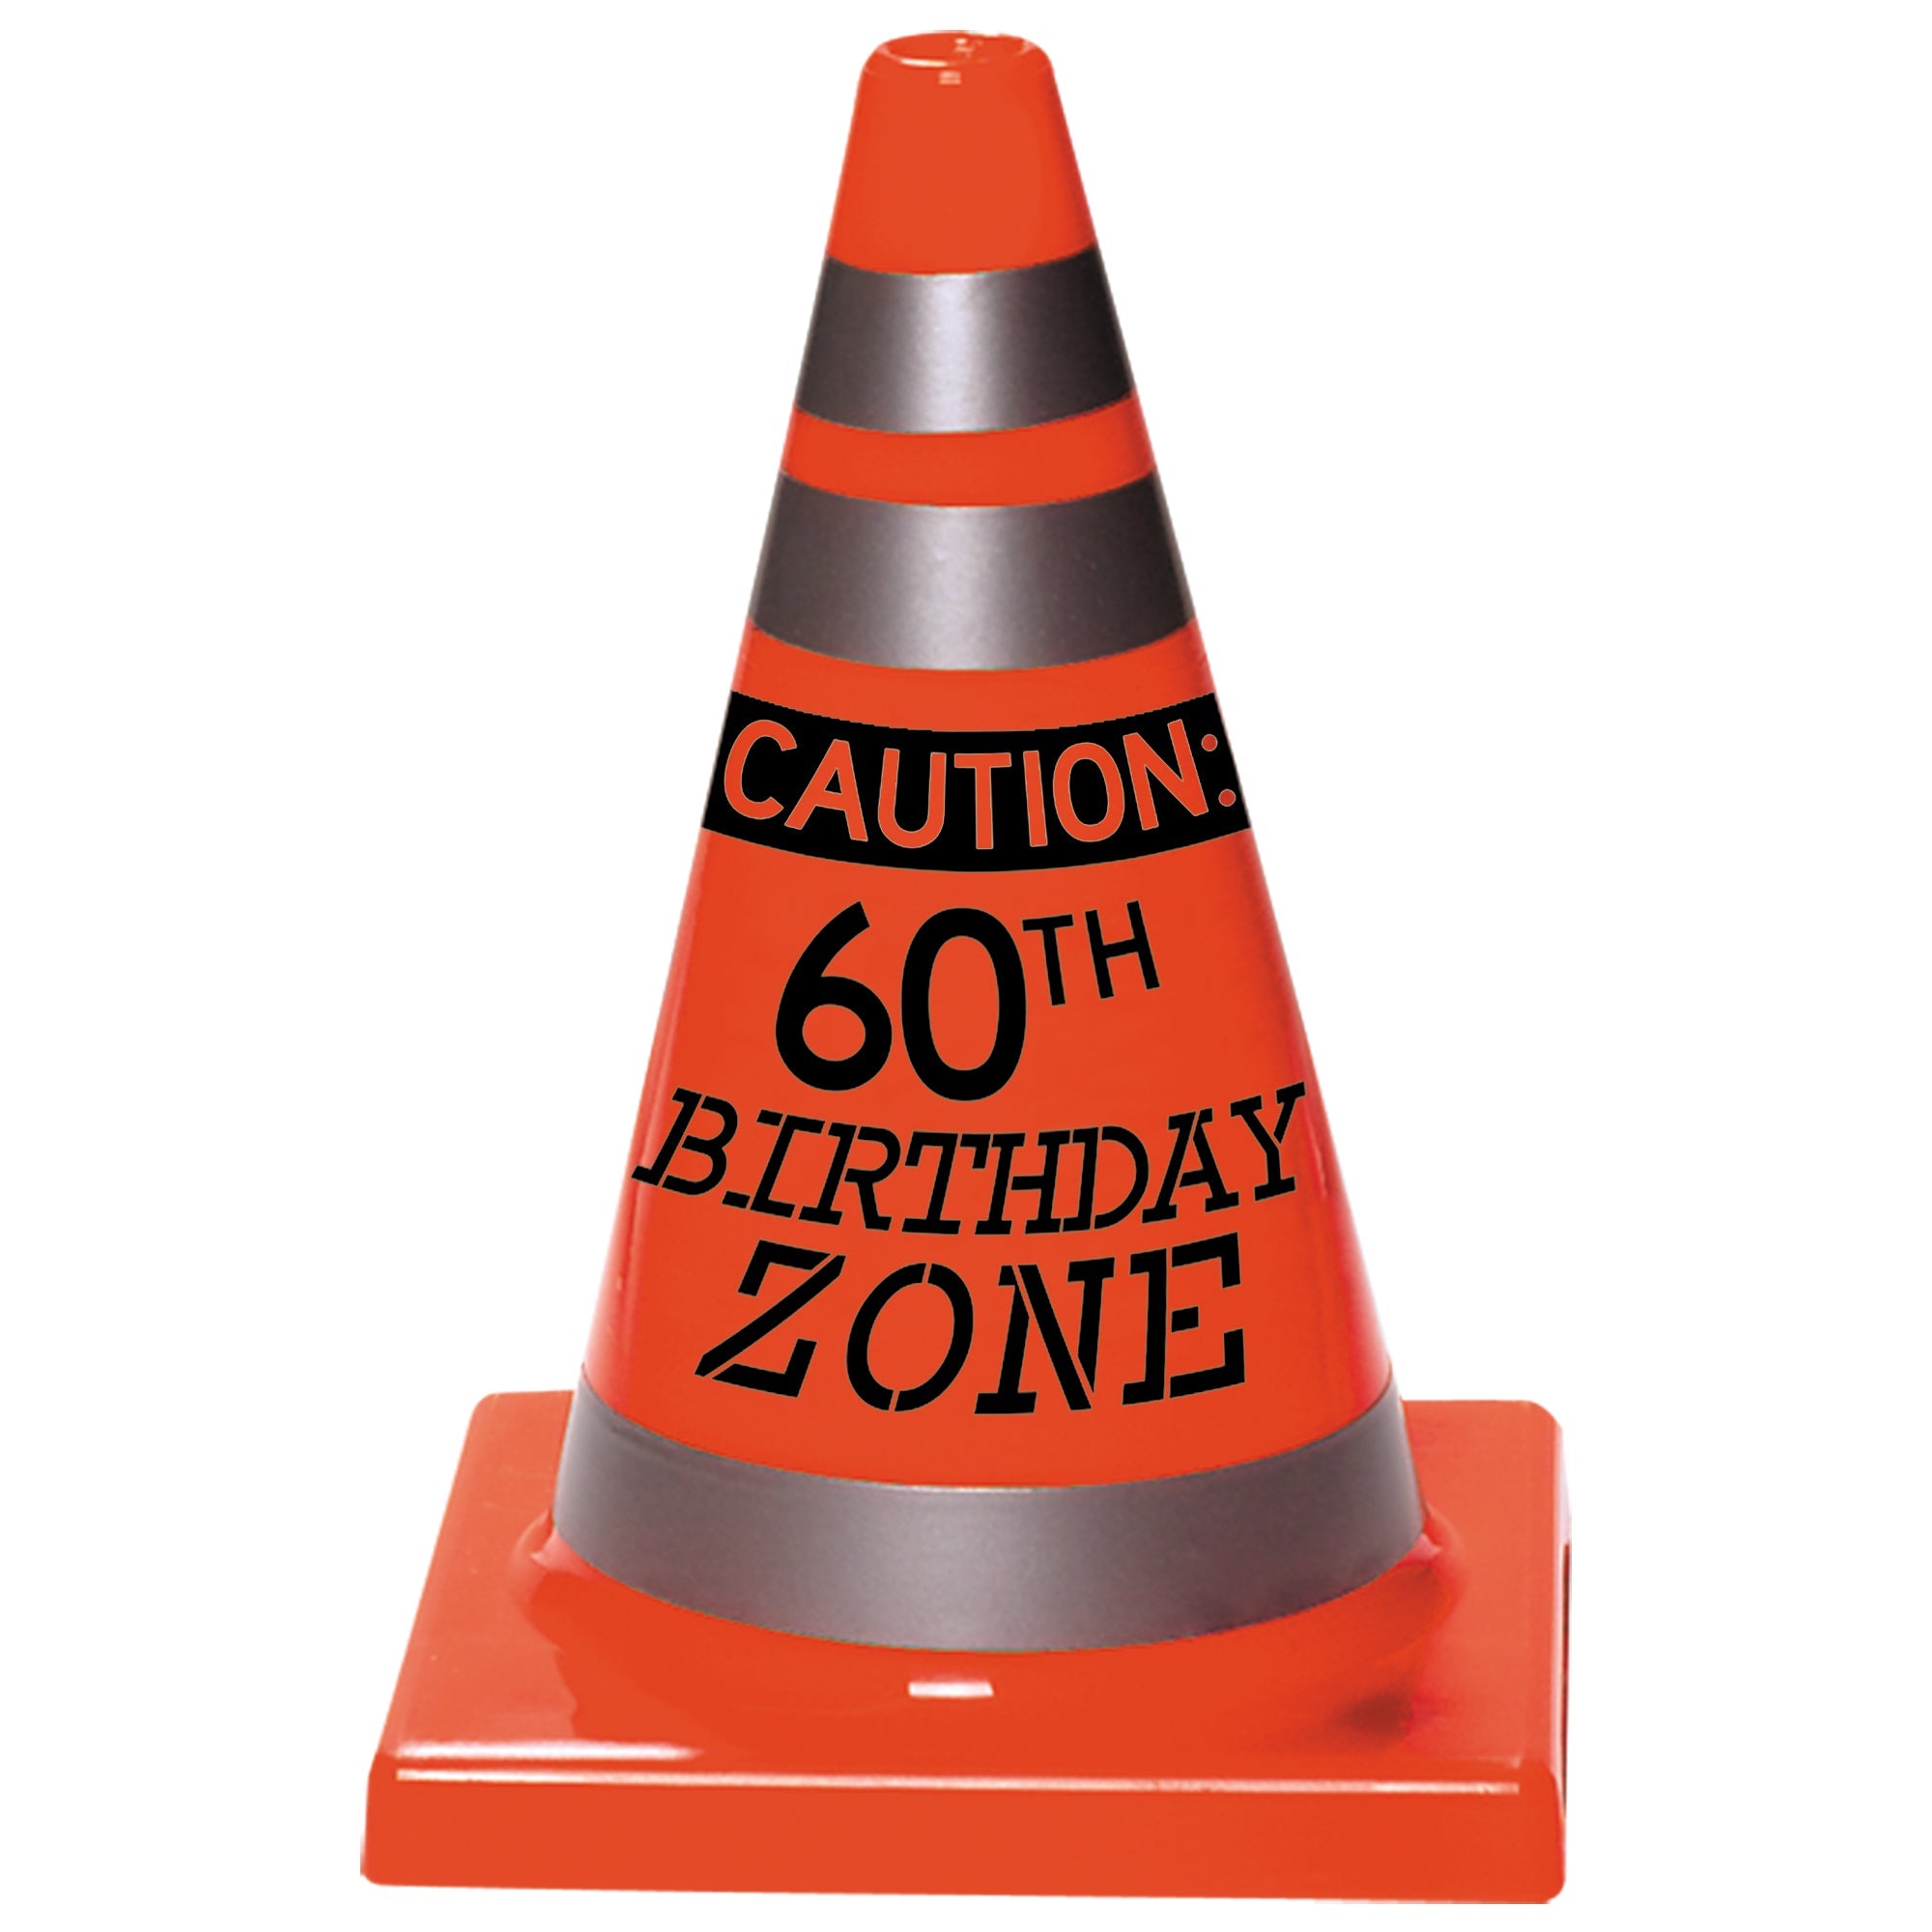 Over the Hill Caution  60th Birthday Constuction Cone 6 1/2" H x 4 1/2" W